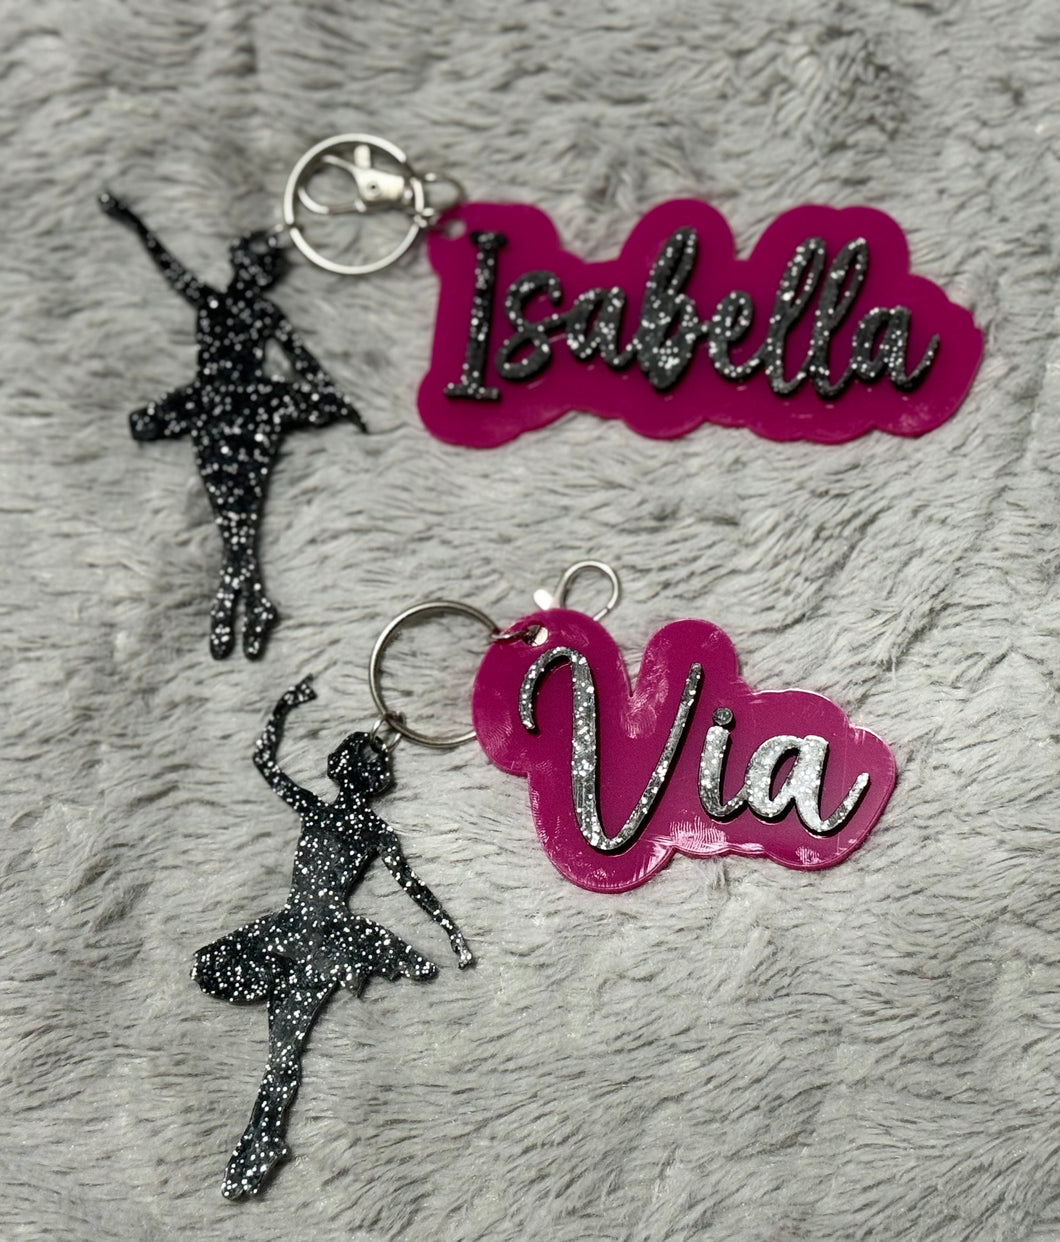 Personalized Keychains for Dance, Gymnastics, Skating or Sports Bag